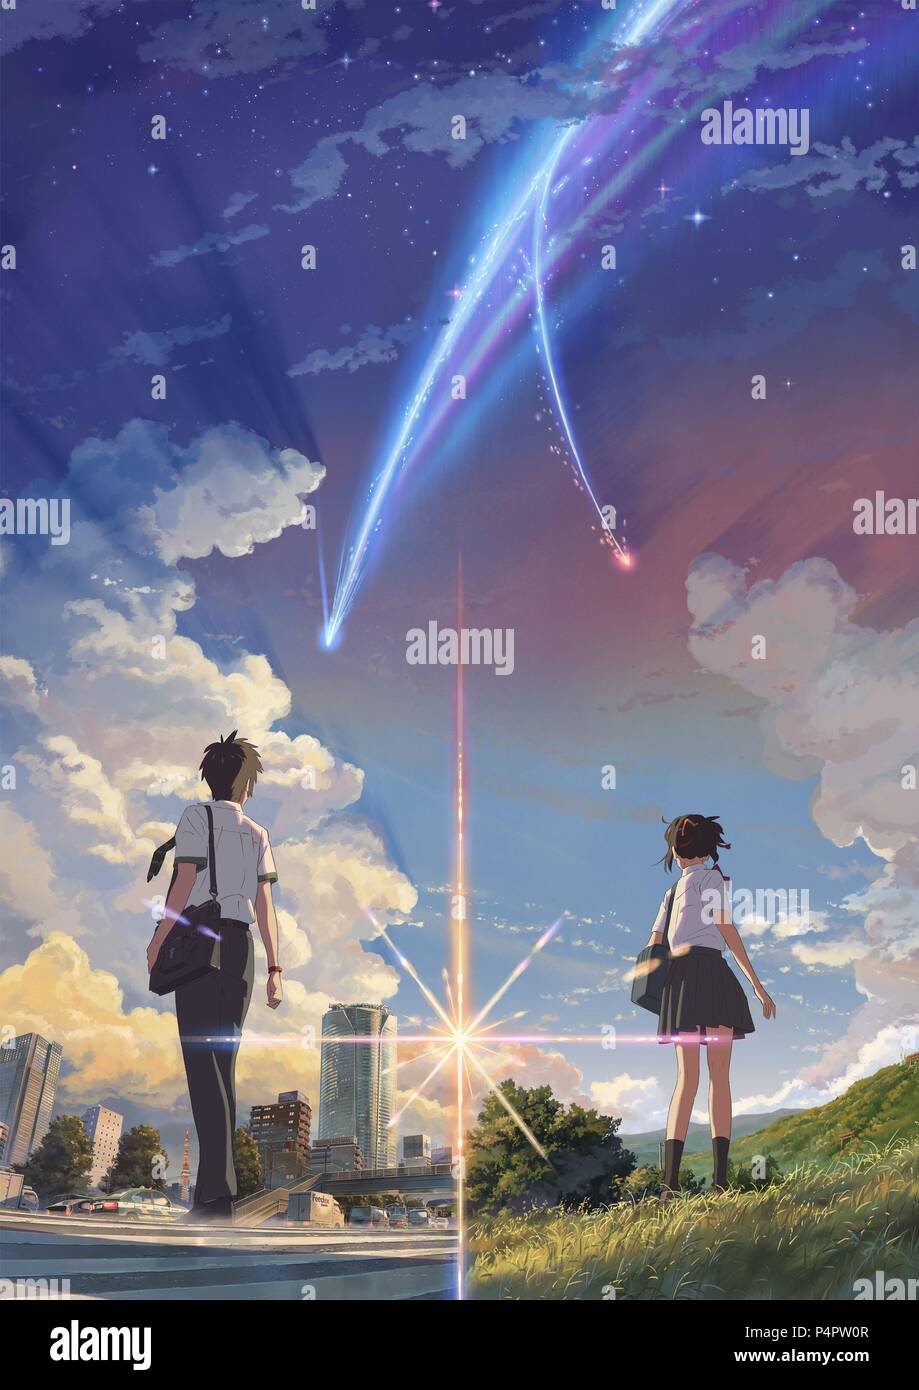 Your Name Film Japan High Resolution Stock Photography And Images Alamy